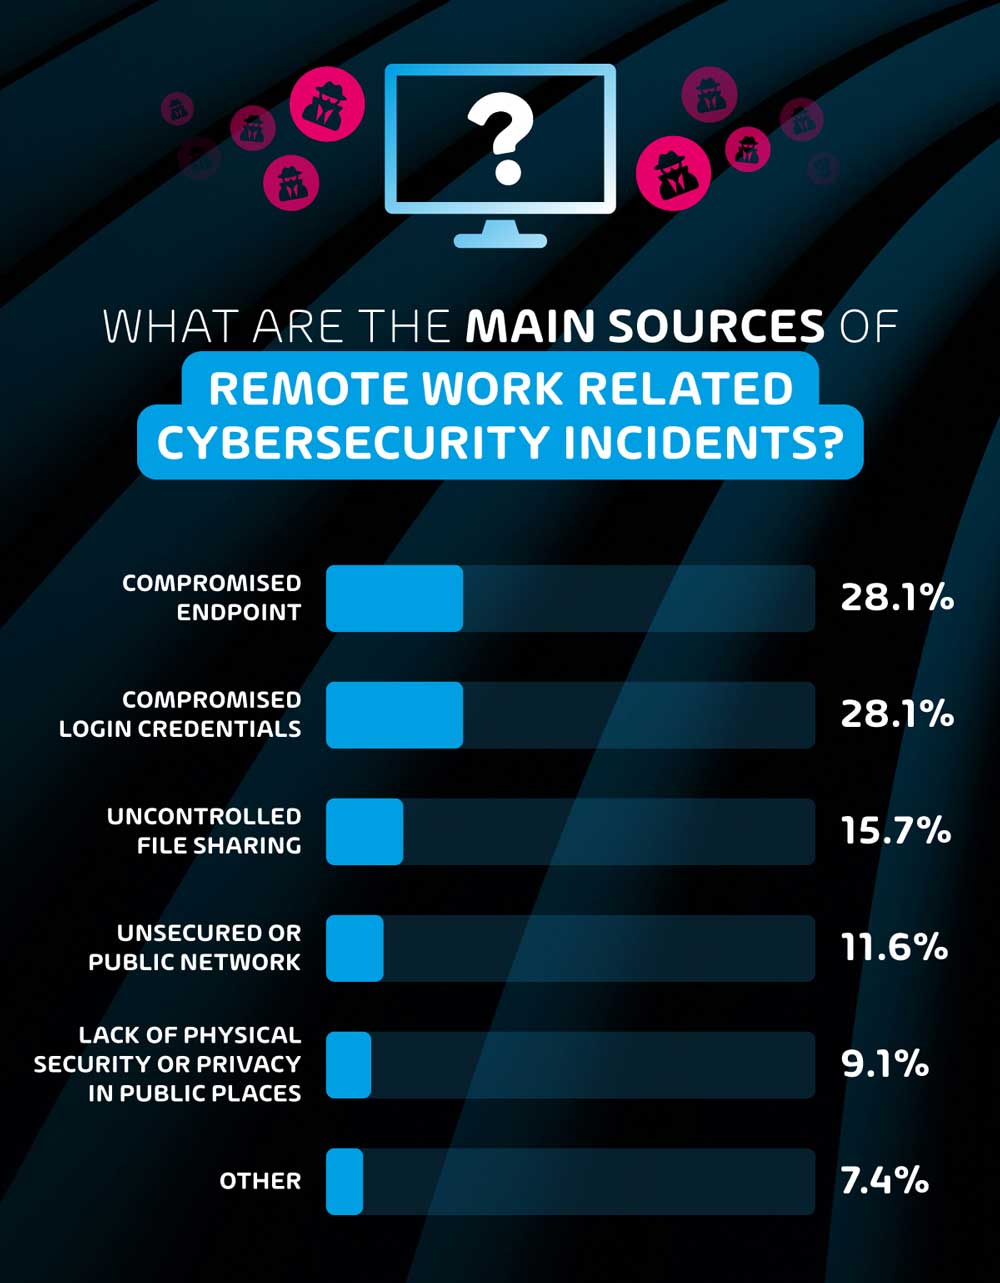 Sources of Remote Work related Cybersecurity Incidents